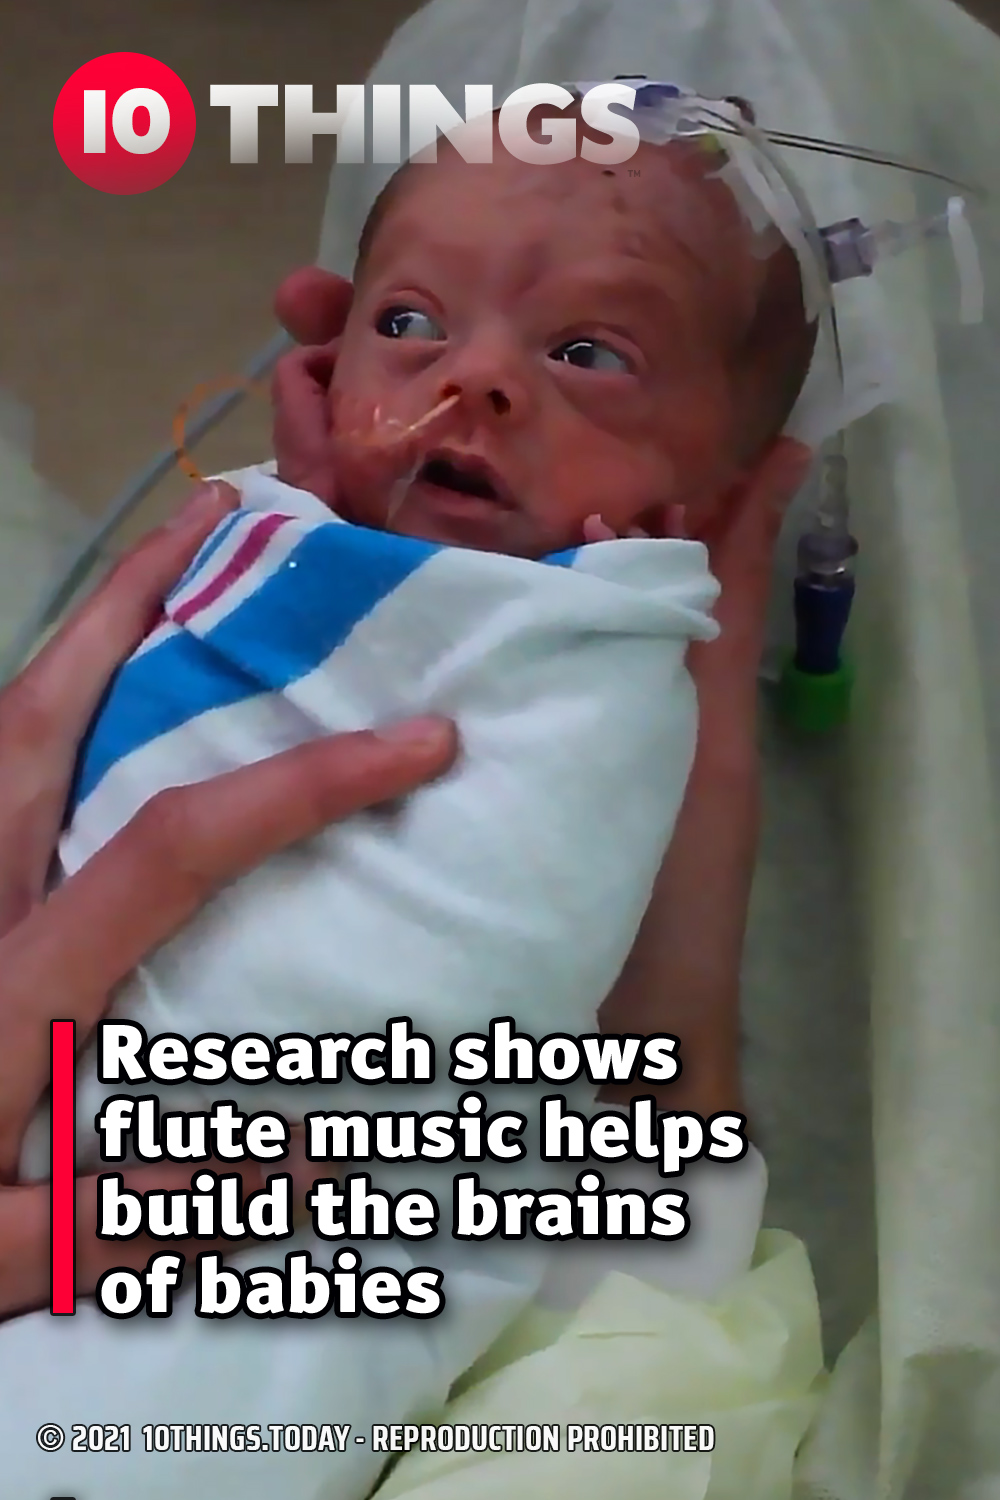 Research shows flute music helps build the brains of babies